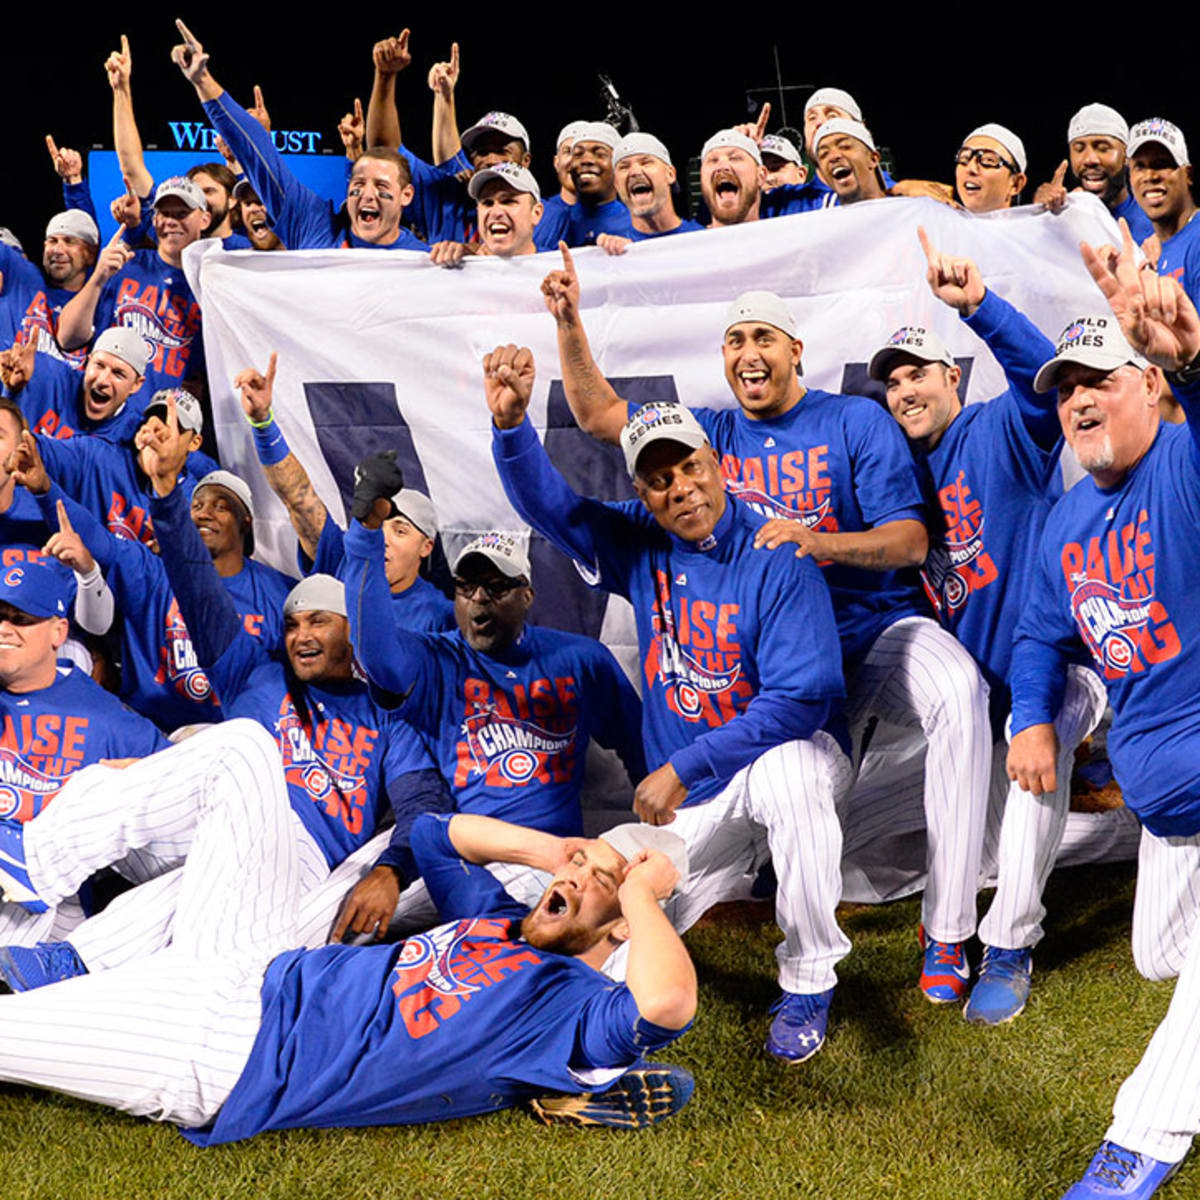 25 fun facts about the Chicago Cubs in the World Series - Sports Illustrated